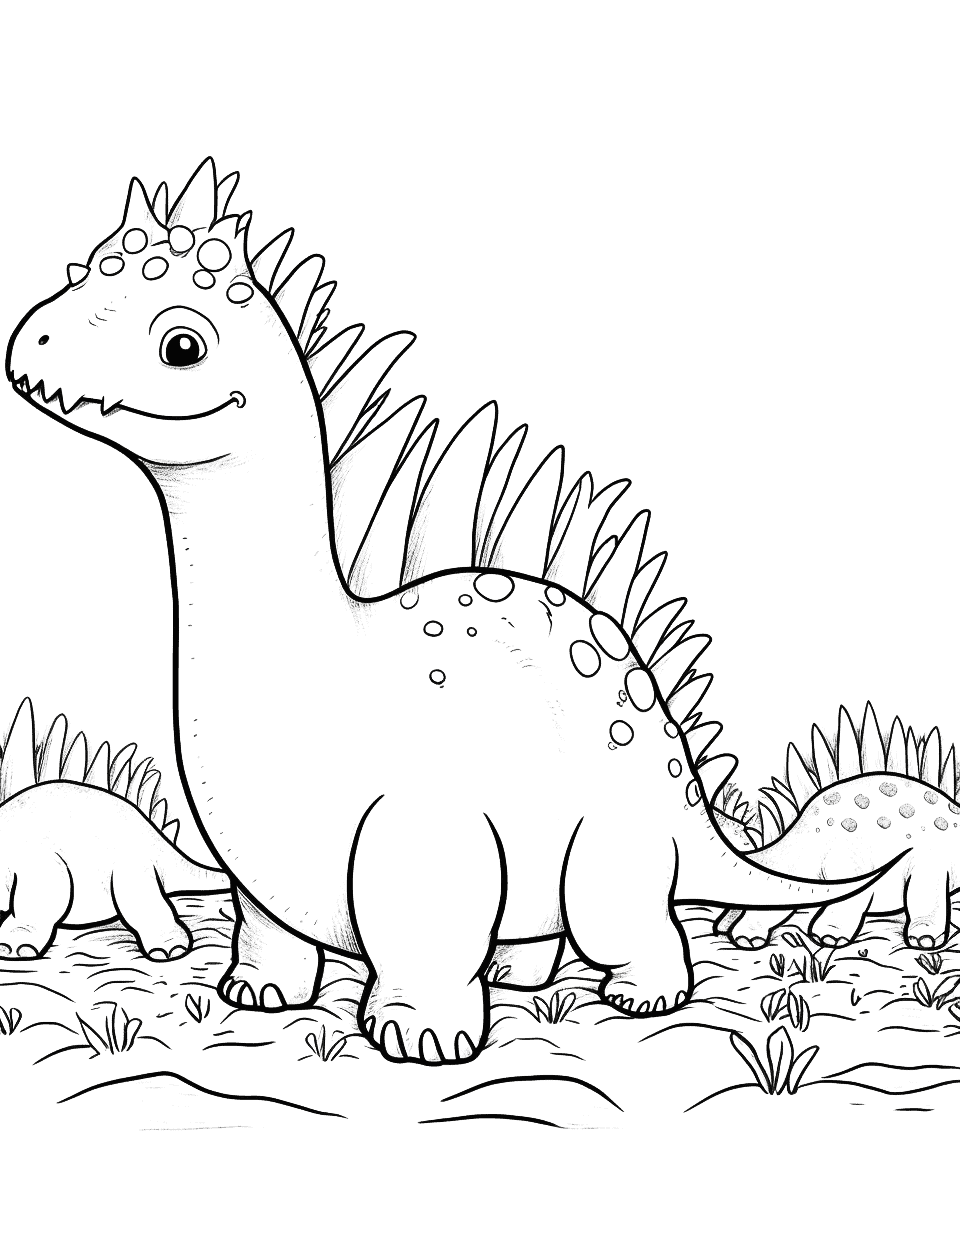 Stegosaurus Herd Coloring Page - A herd of Stegosaurus moving across the plain.